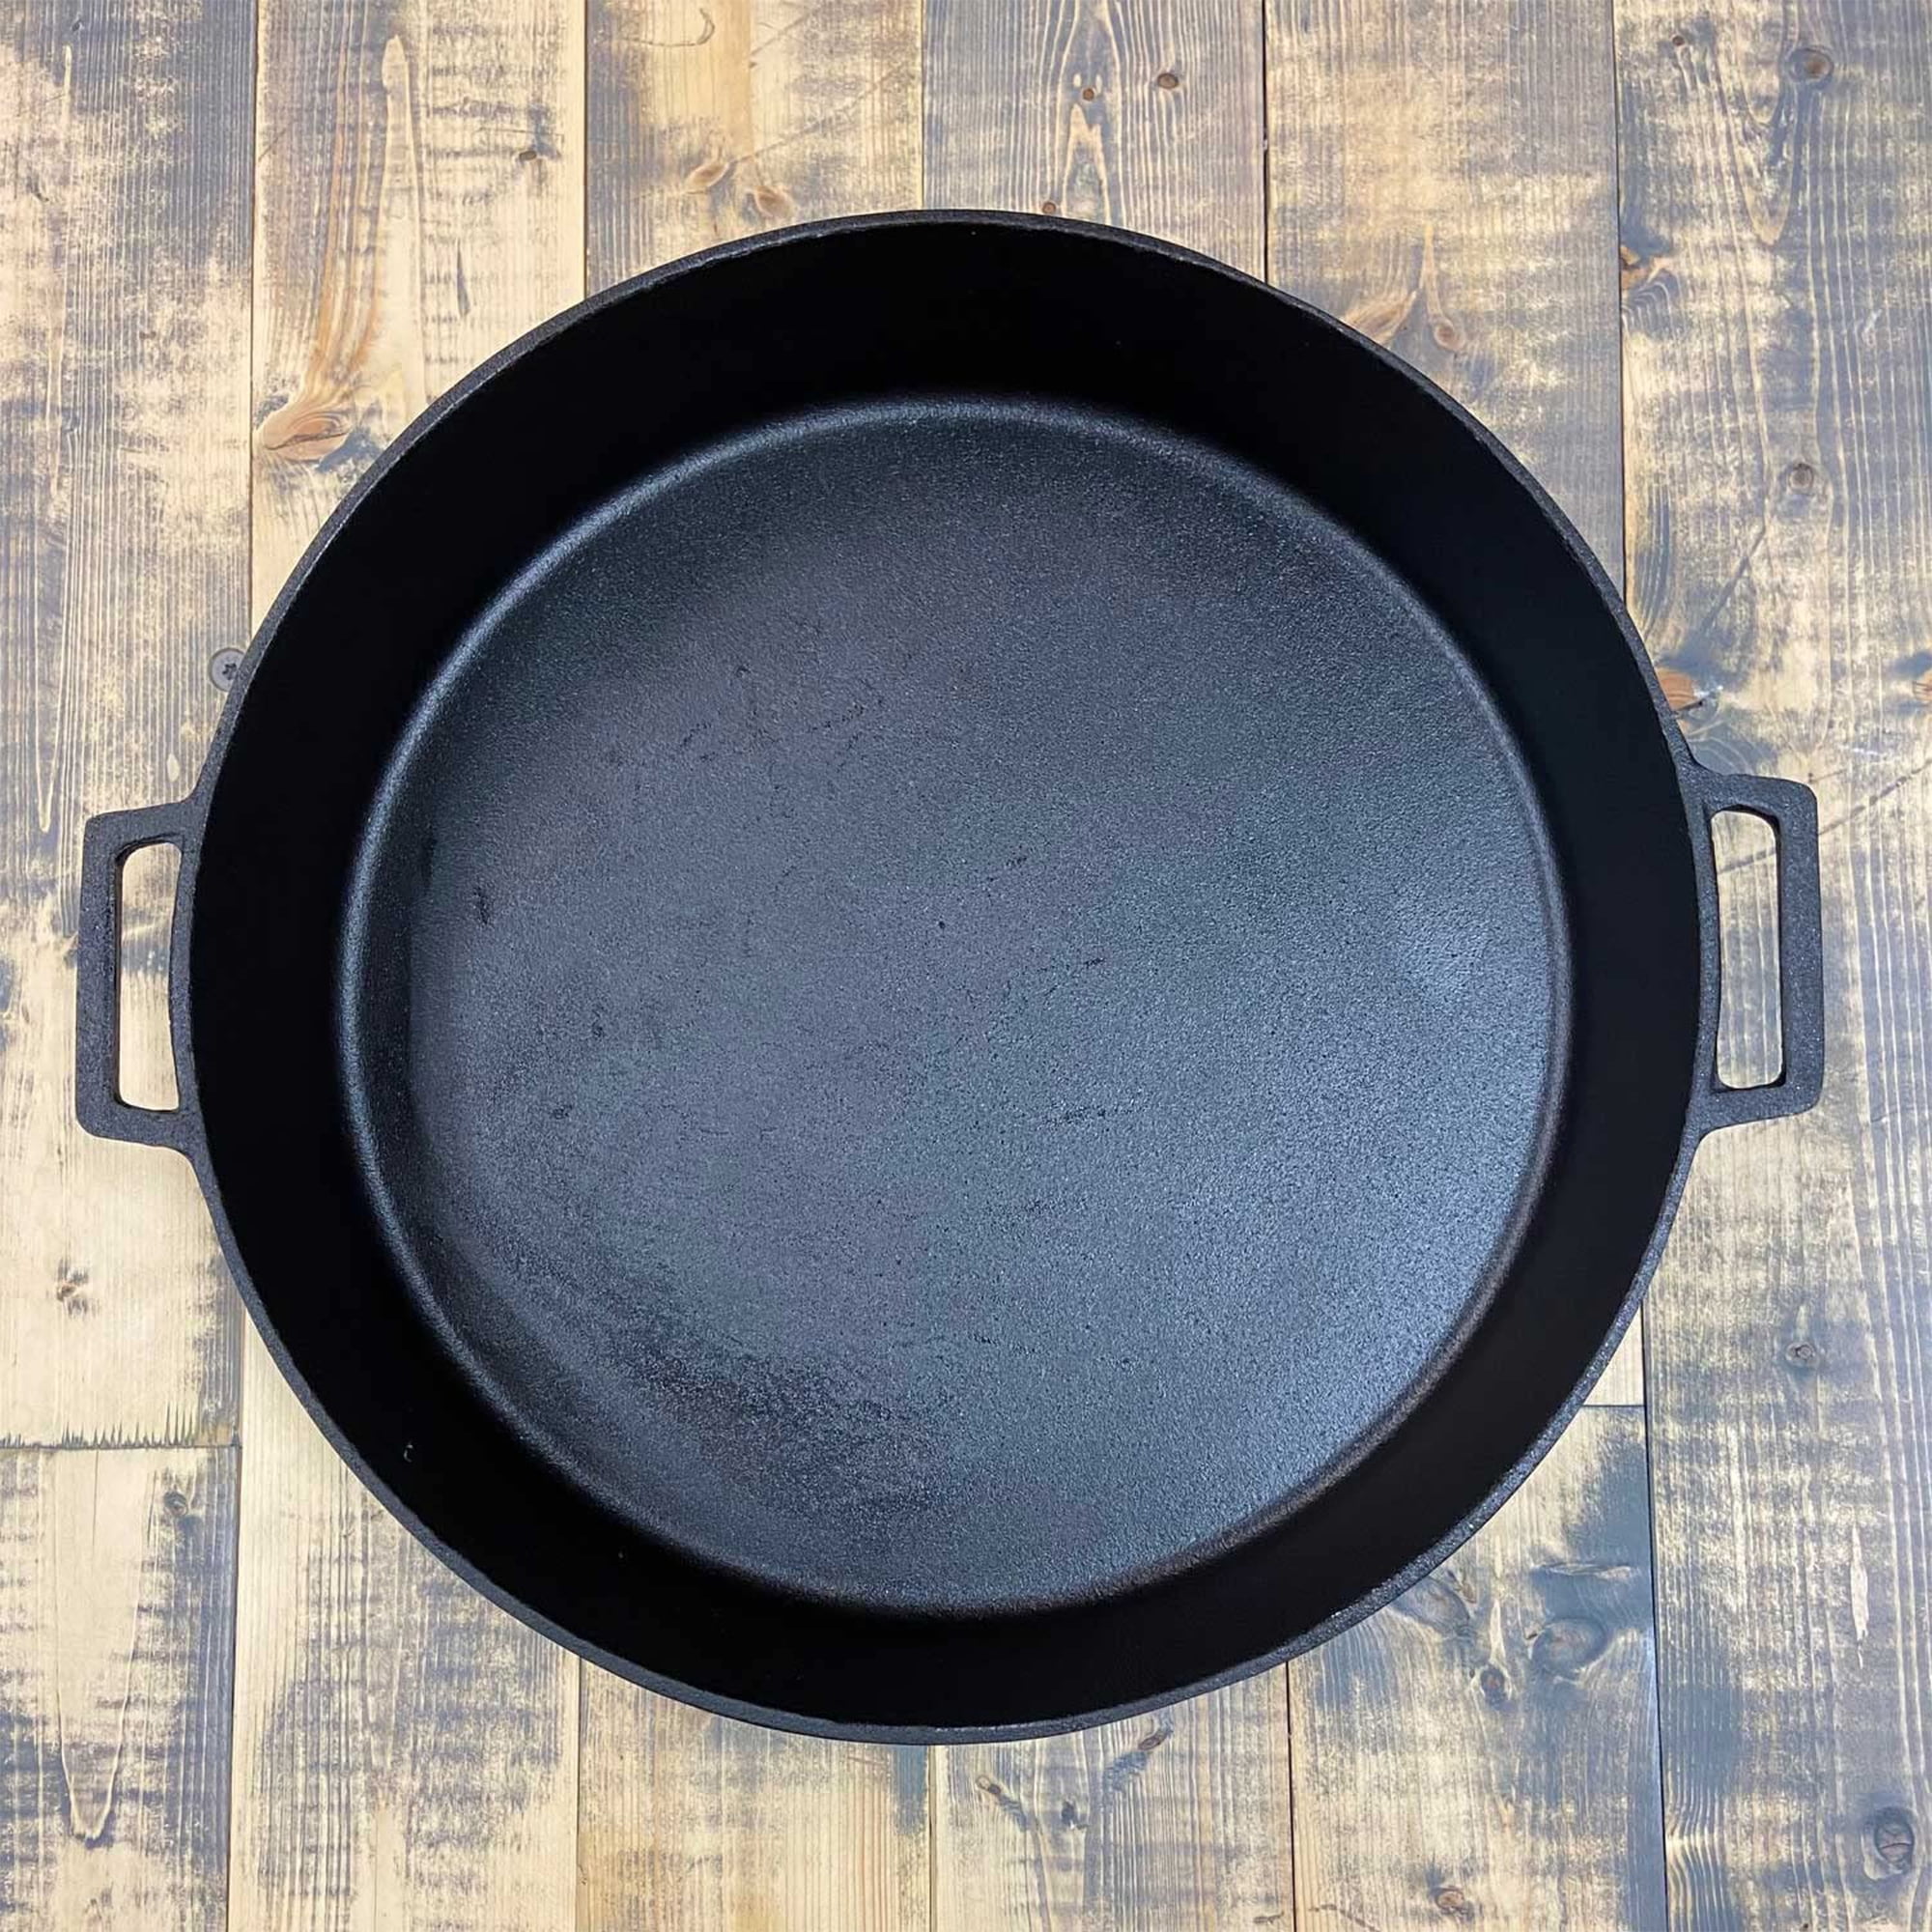 Bayou Classic 12 Inch Square Cast Iron Skillet Cookware Pan with Helper  Handle and Pour Spouts for Home Kitchen Cooking, Black